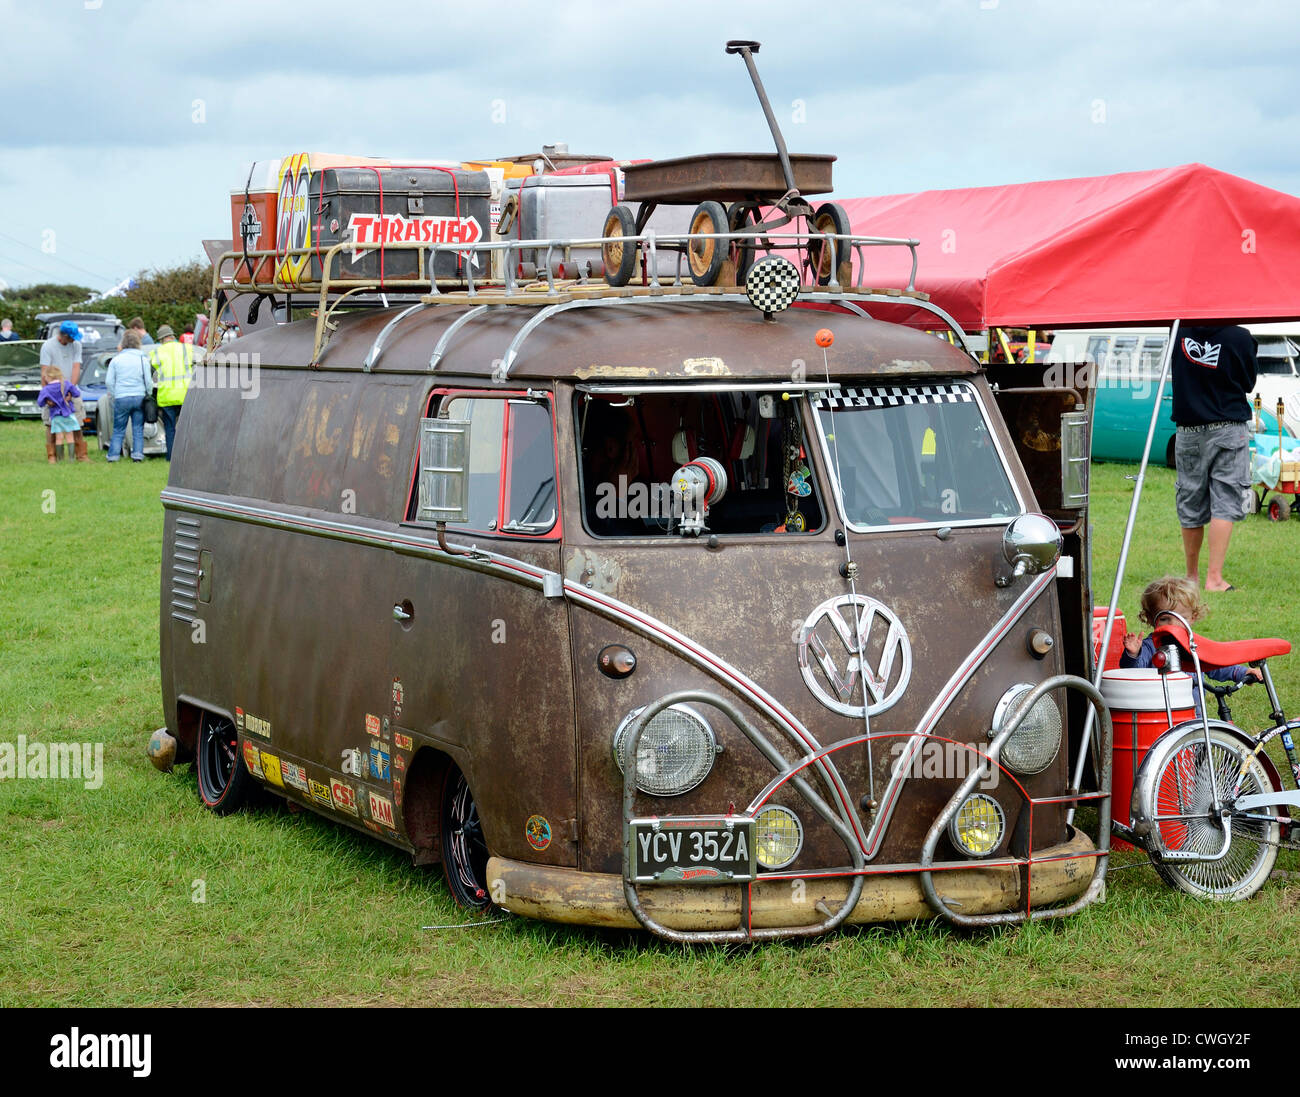 A VW camper van at a Volkswagen rally in Cornwall, UK Stock Photo - Alamy